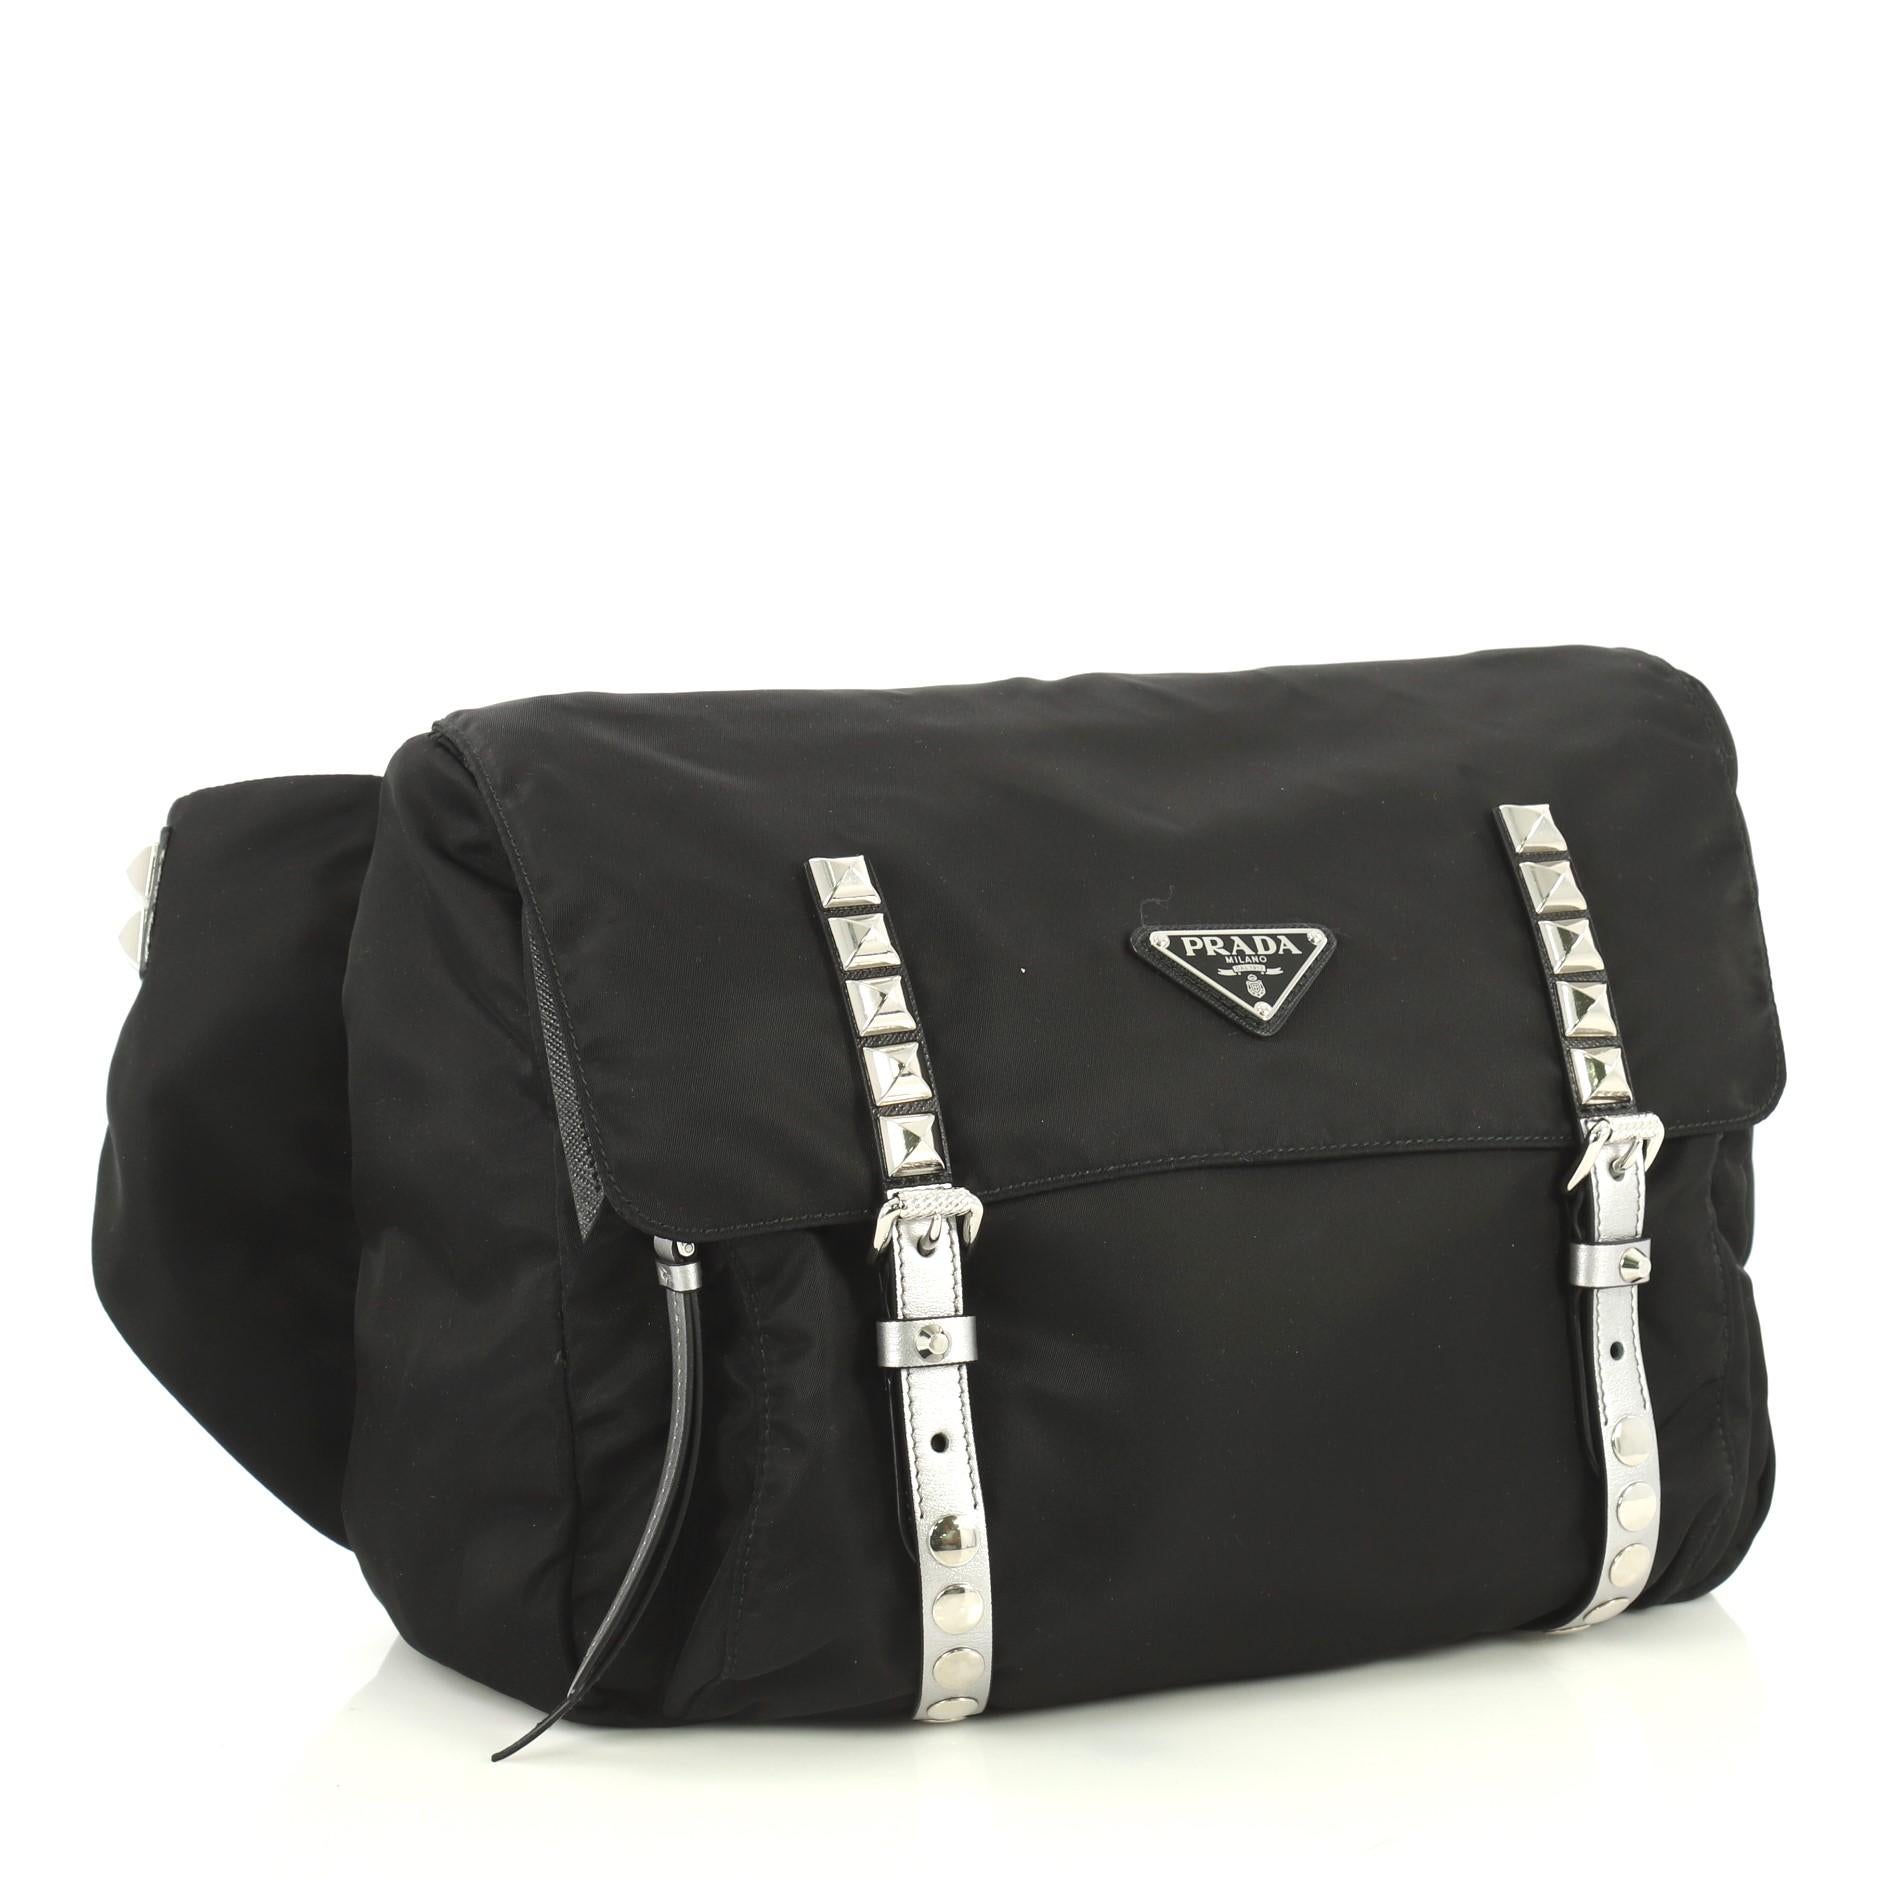 This Prada New Vela Flap Messenger Bag Tessuto with Studded Leather Medium, crafted in black tessuto with studded leather, features an adjustable leather strap, exterior back zip pocket, and silver-tone hardware. Its buckle and zip closure opens to